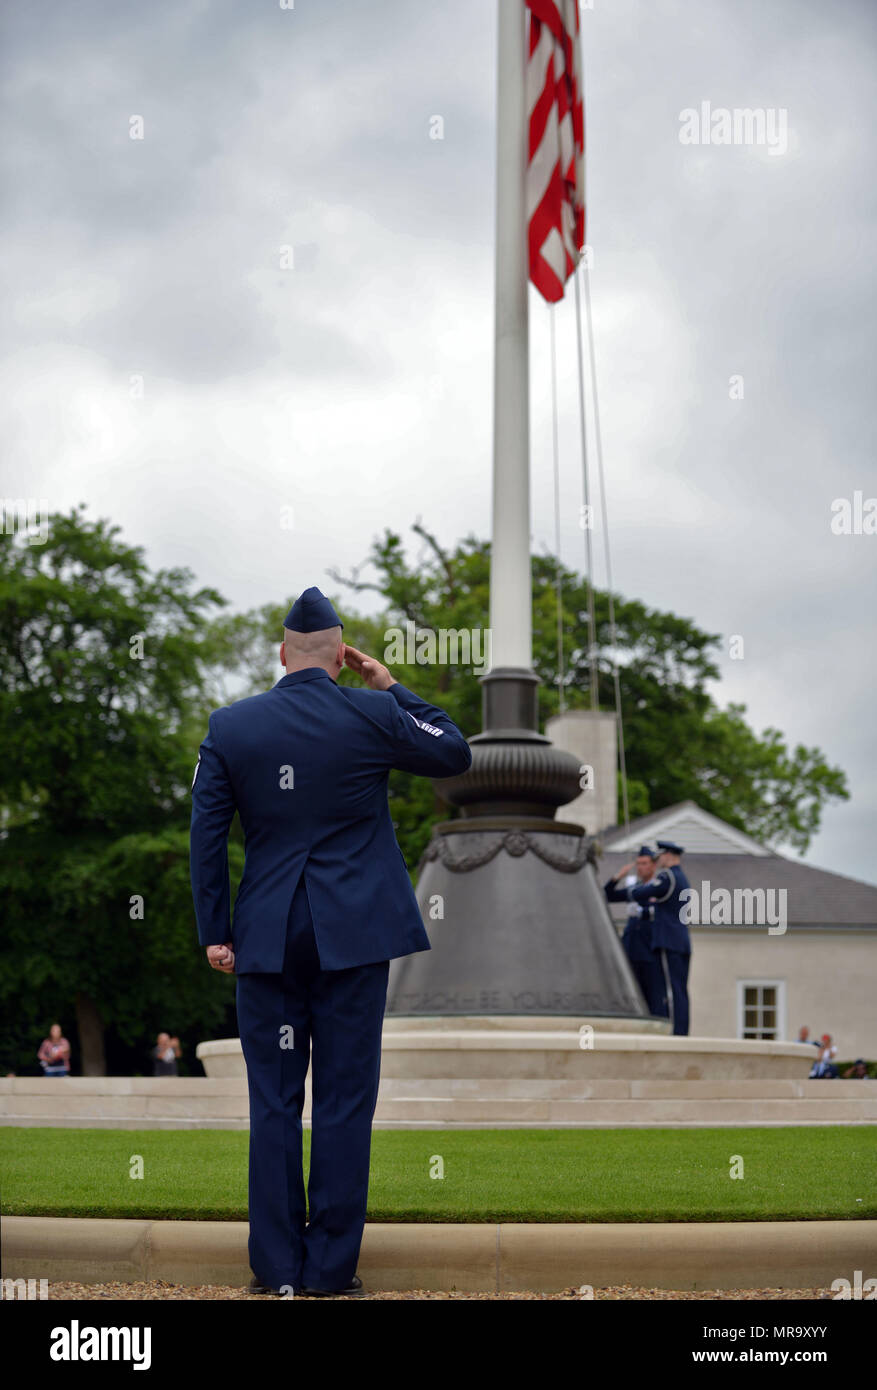 A U.S. Air Force Master Sgt. salutes the U.S. flag during the Madingley Memorial Day ceremony May 29, 2017, at Madingley Memorial Cemetery in Cambridge, England. The Memorial Day ceremony included keynote speakers, wreath laying and fly-overs. (U.S. Air Force photo by Senior Airman Christine Groening) Stock Photo